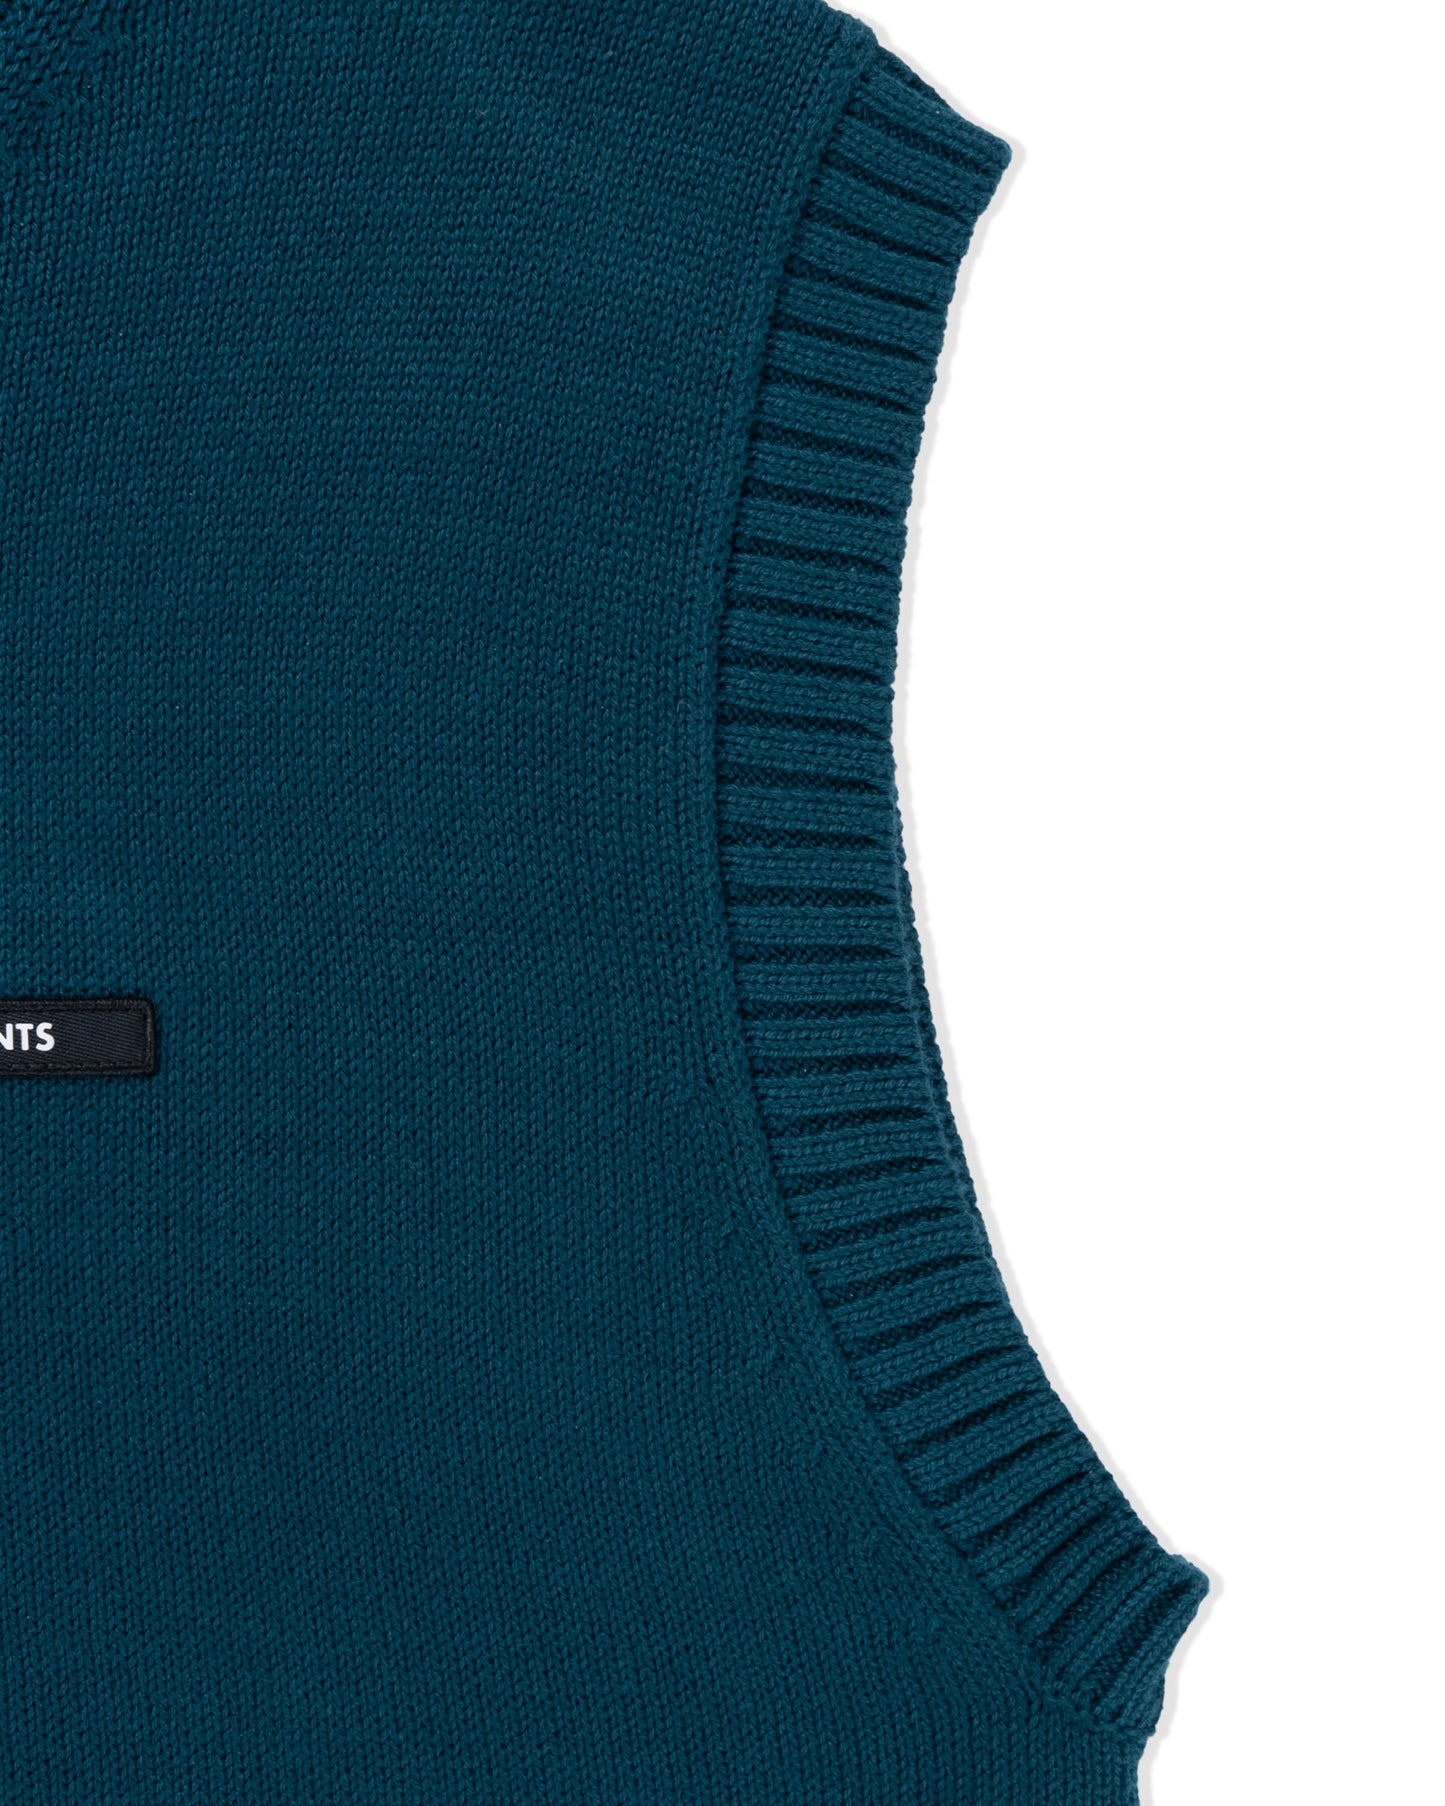 Levents® Classic Knit Oversized Gile/ Dark Teal